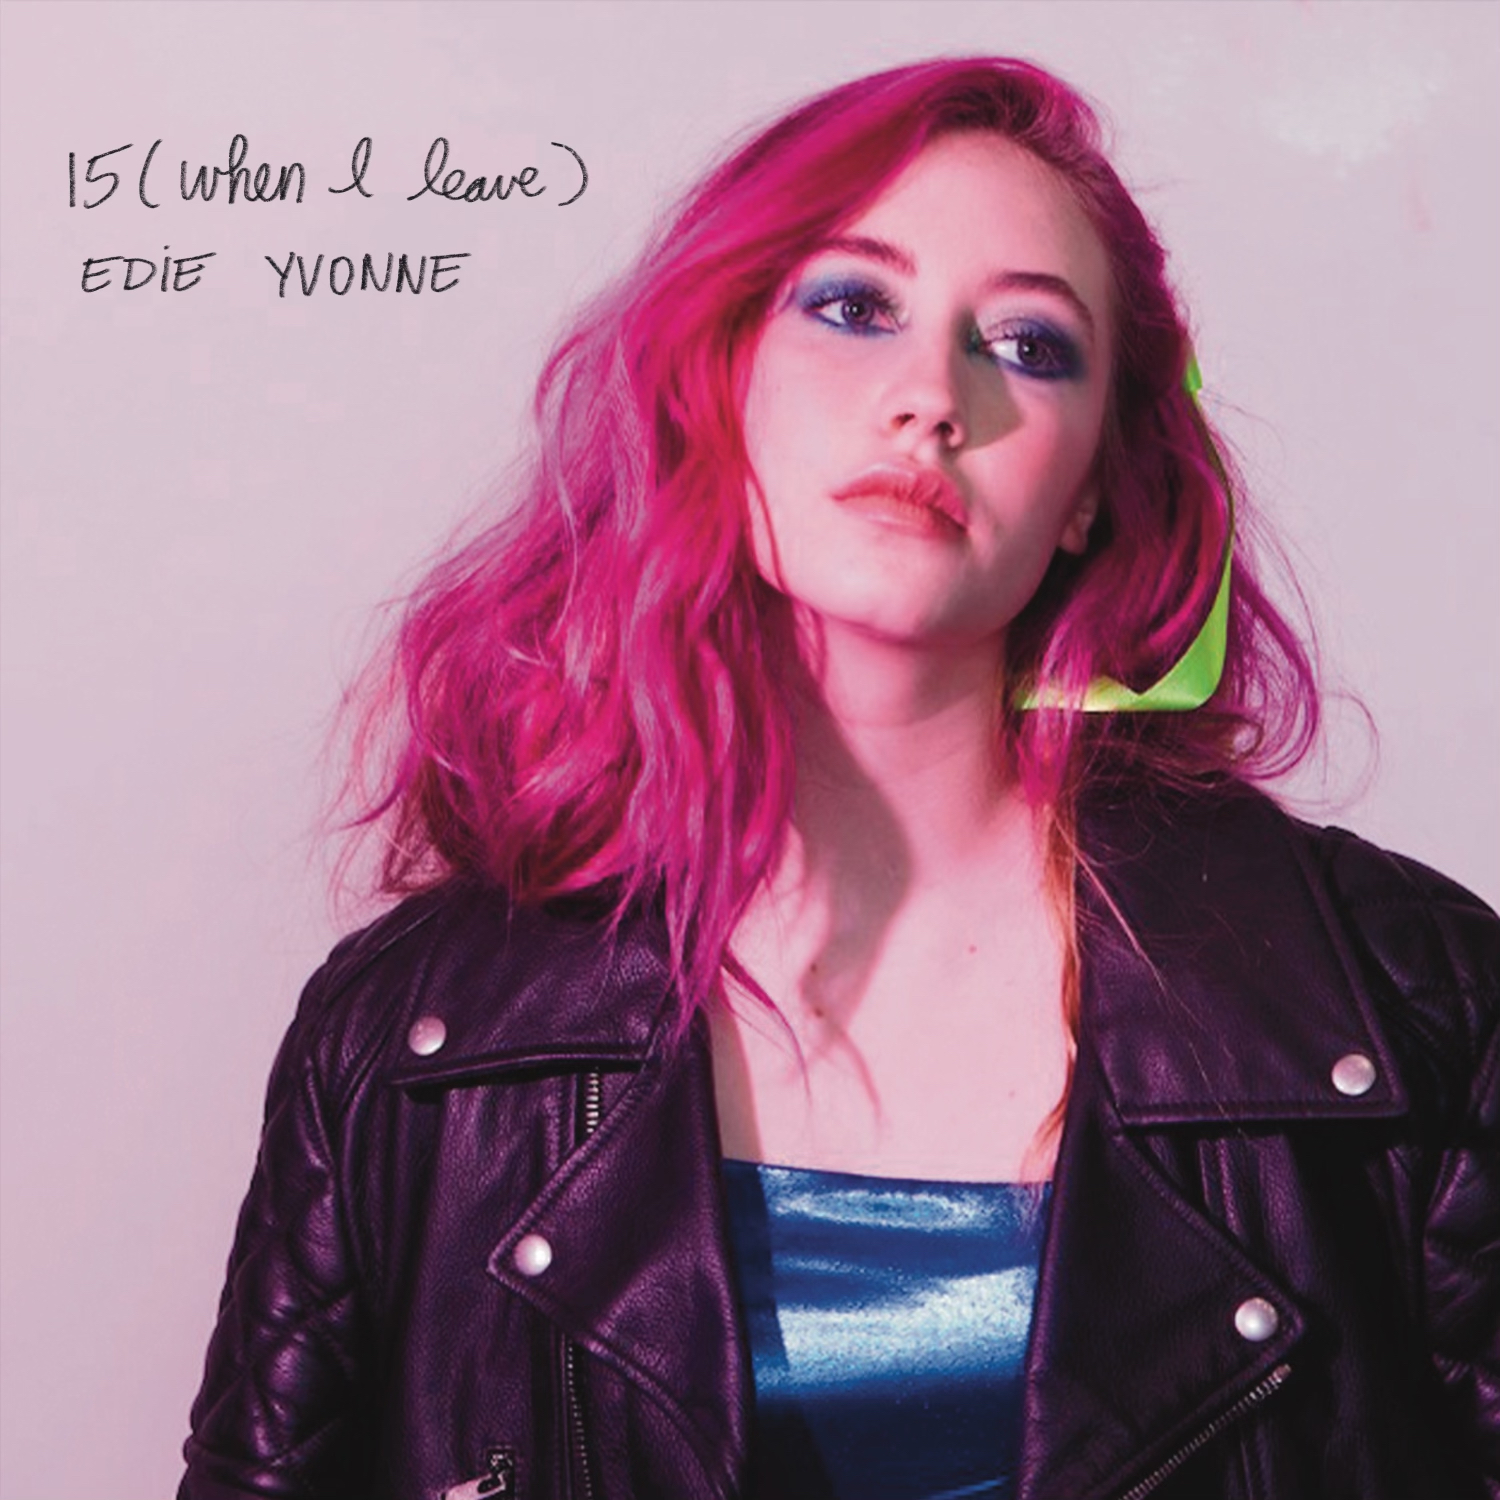 Song 15 (When I Leave) by Edie Yvonne cover art